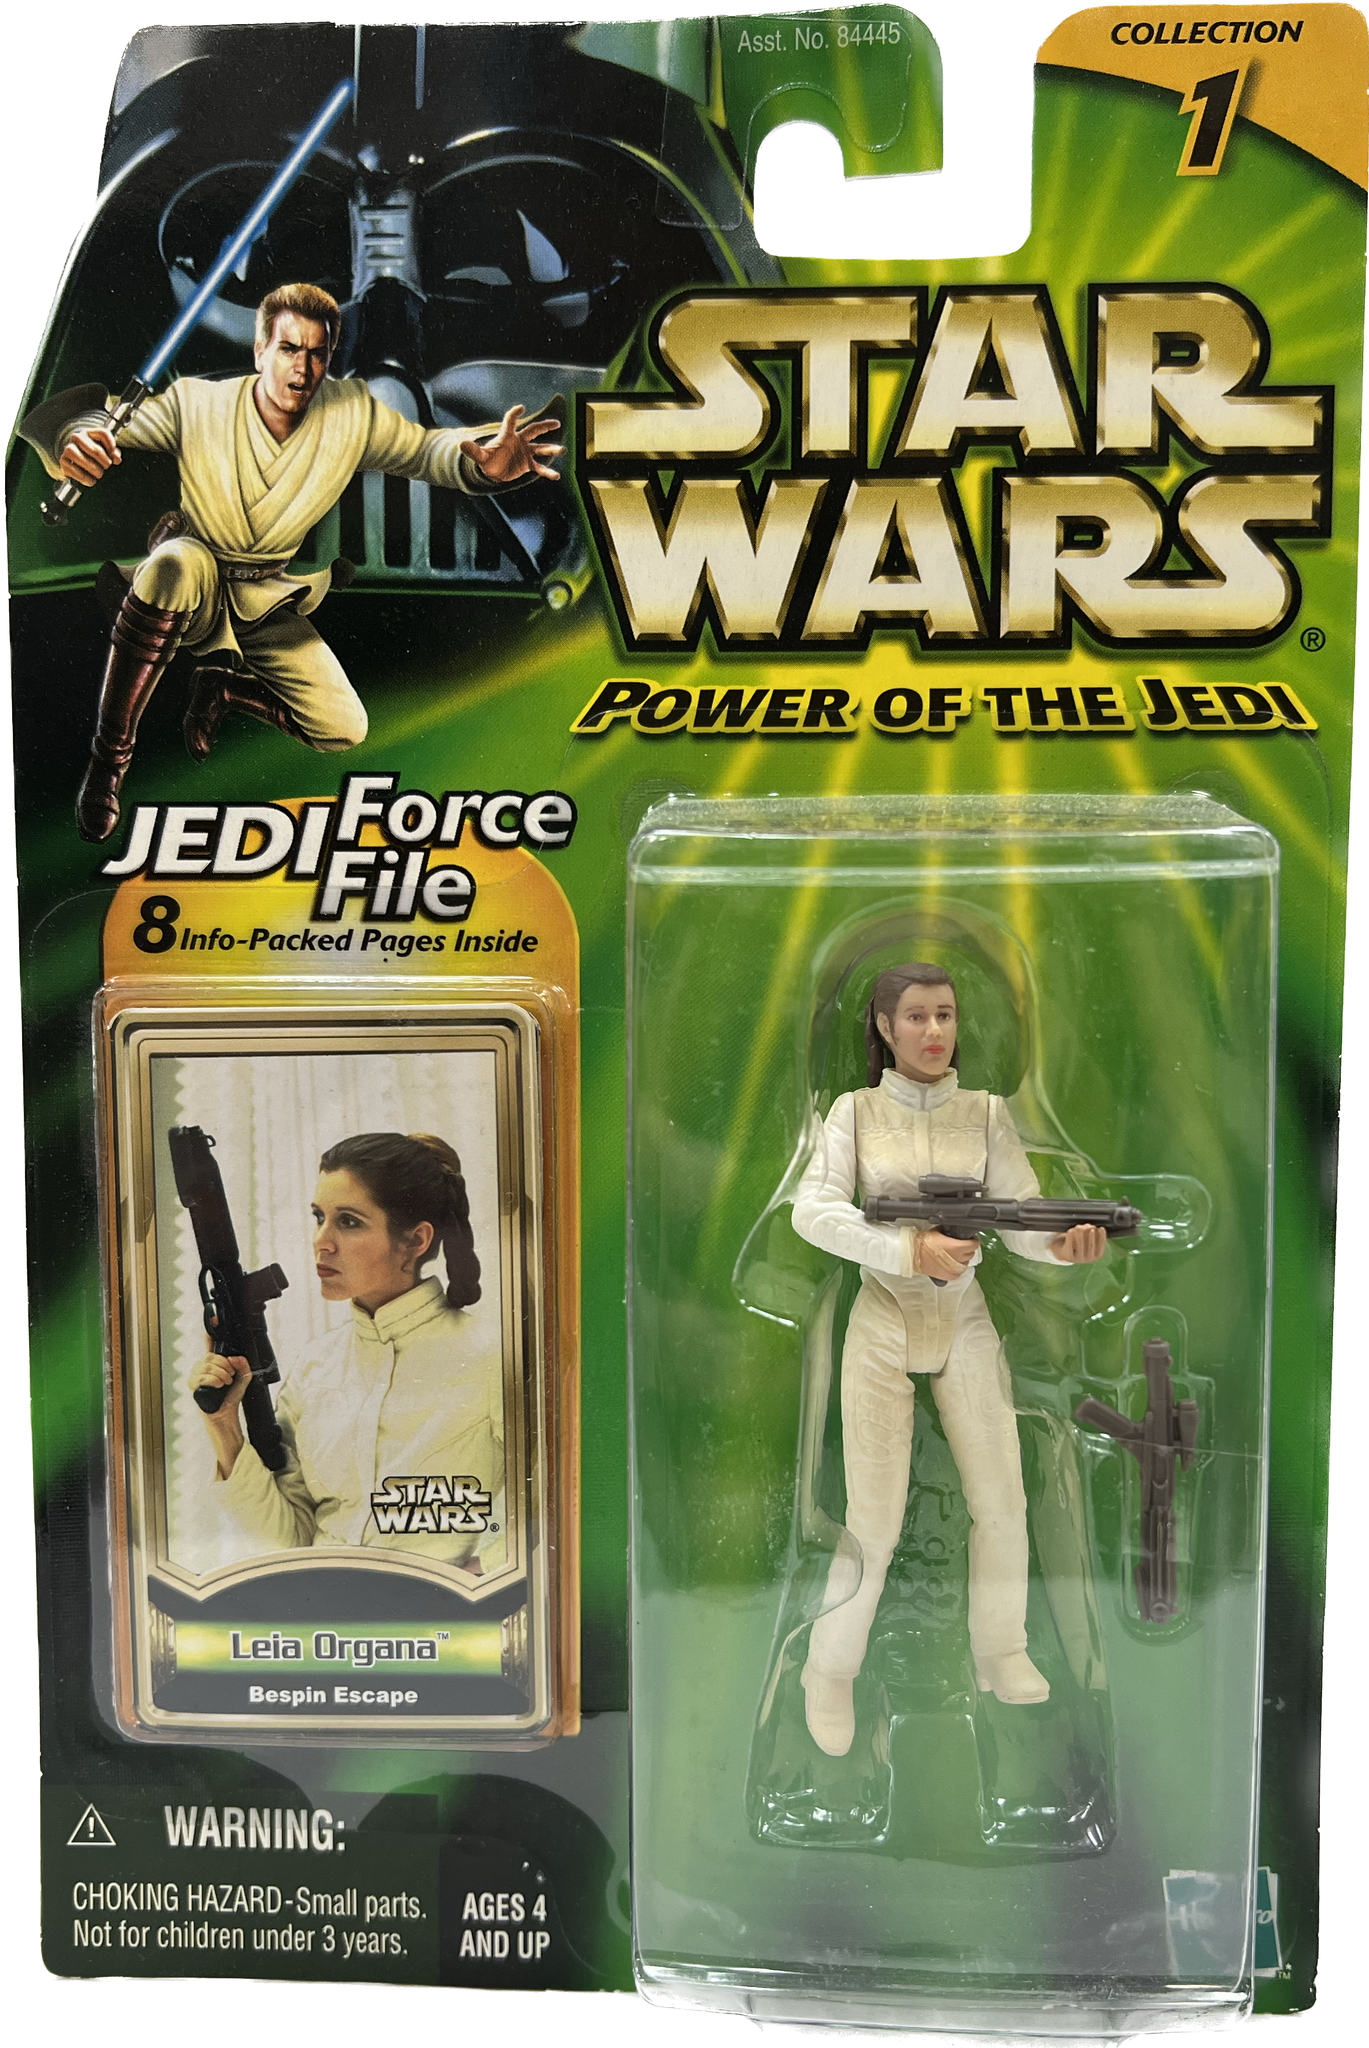 Star Wars Power of the Jedi Leia Organa Bespin Escape